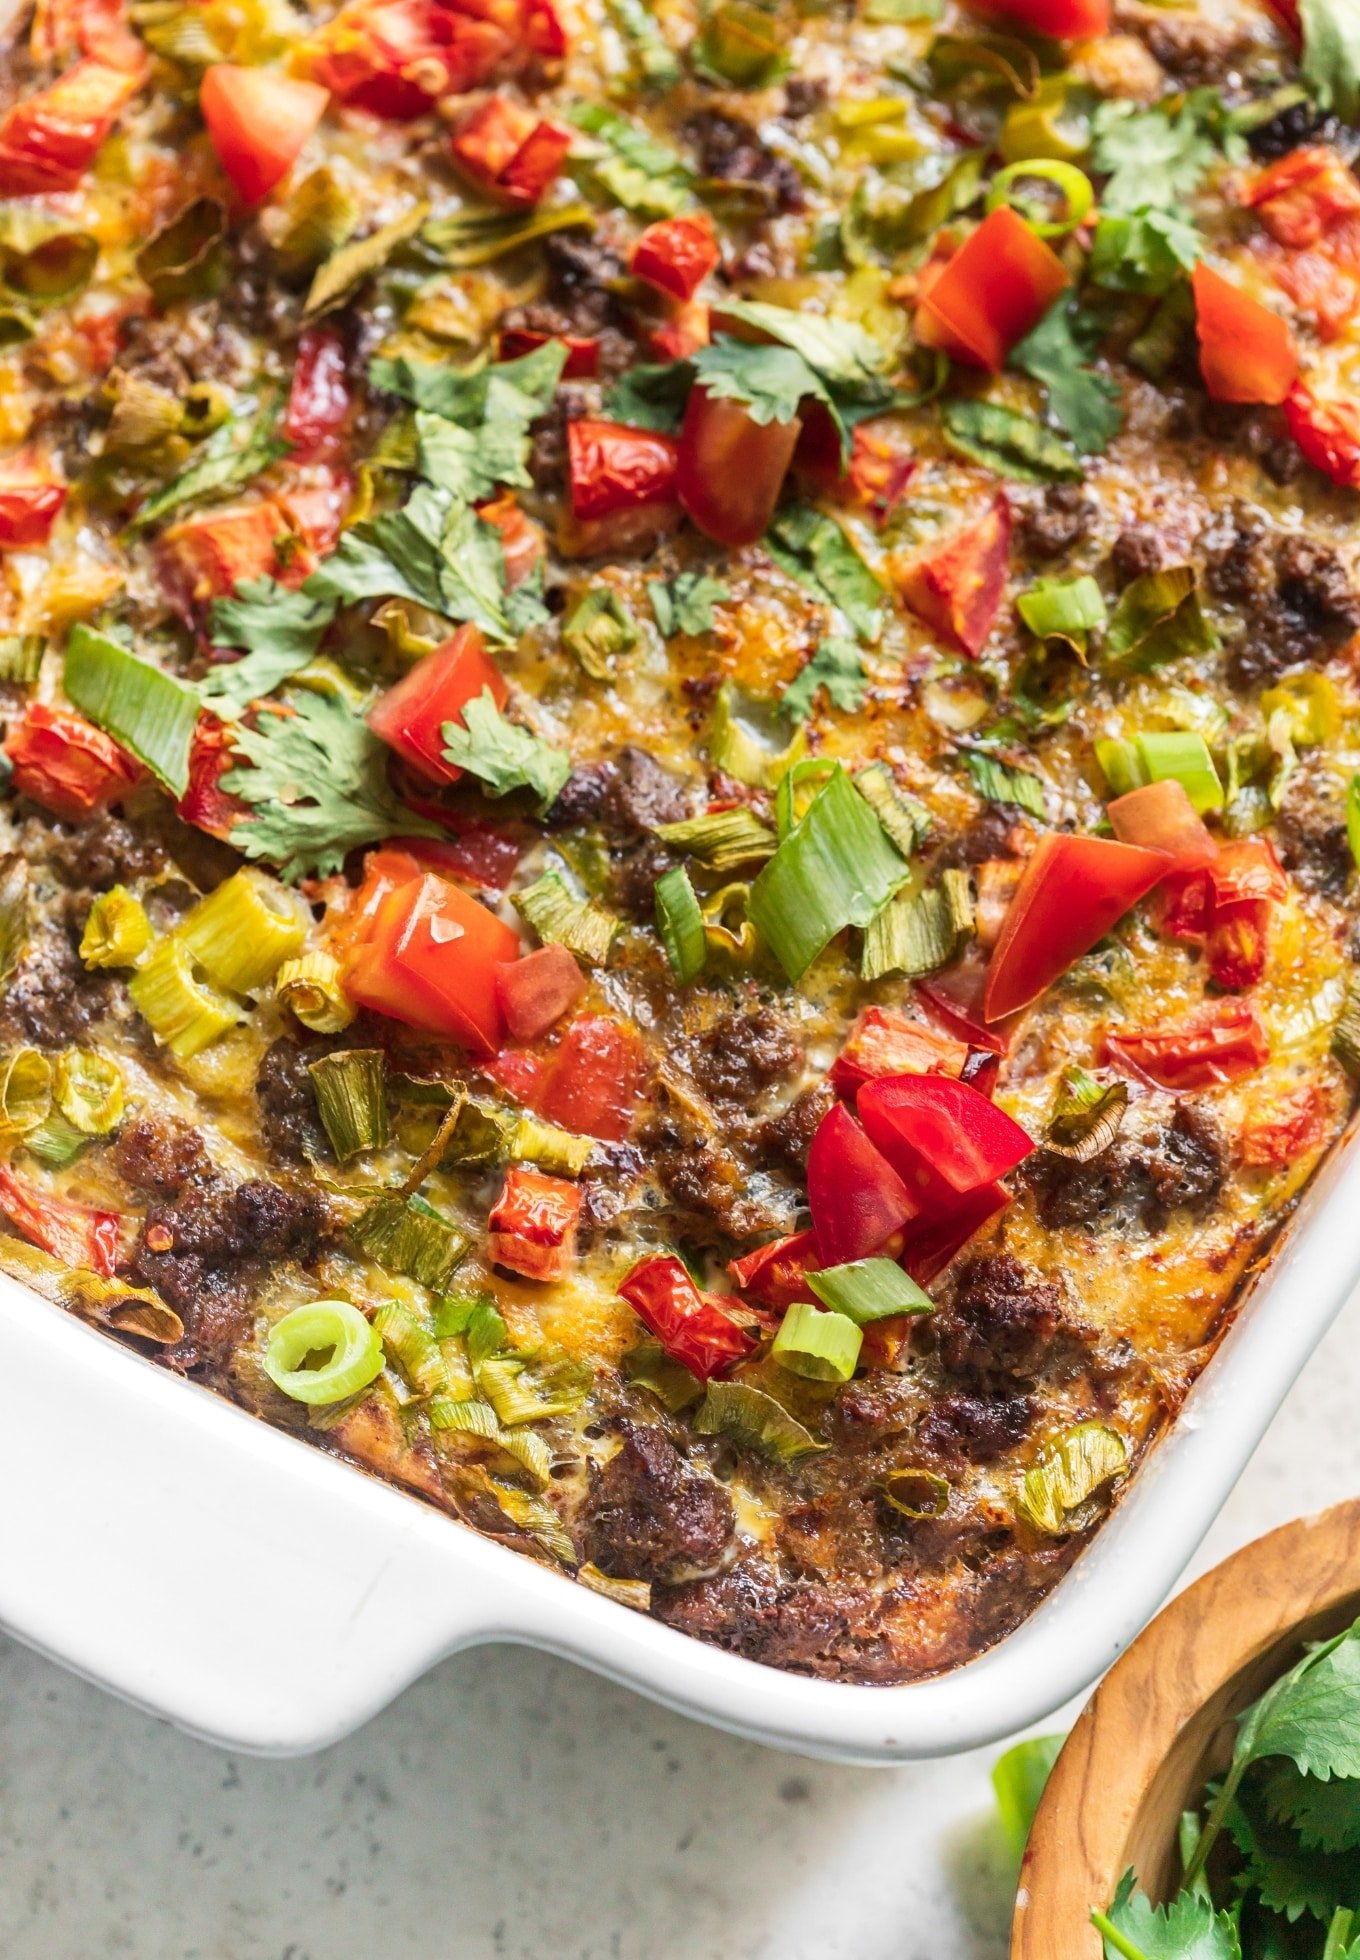 https://thewholecook.com/wp-content/uploads/2021/06/Dairy-Free-Mexican-Breakfast-Casserole-by-The-Whole-Cook-vertical-1.jpg